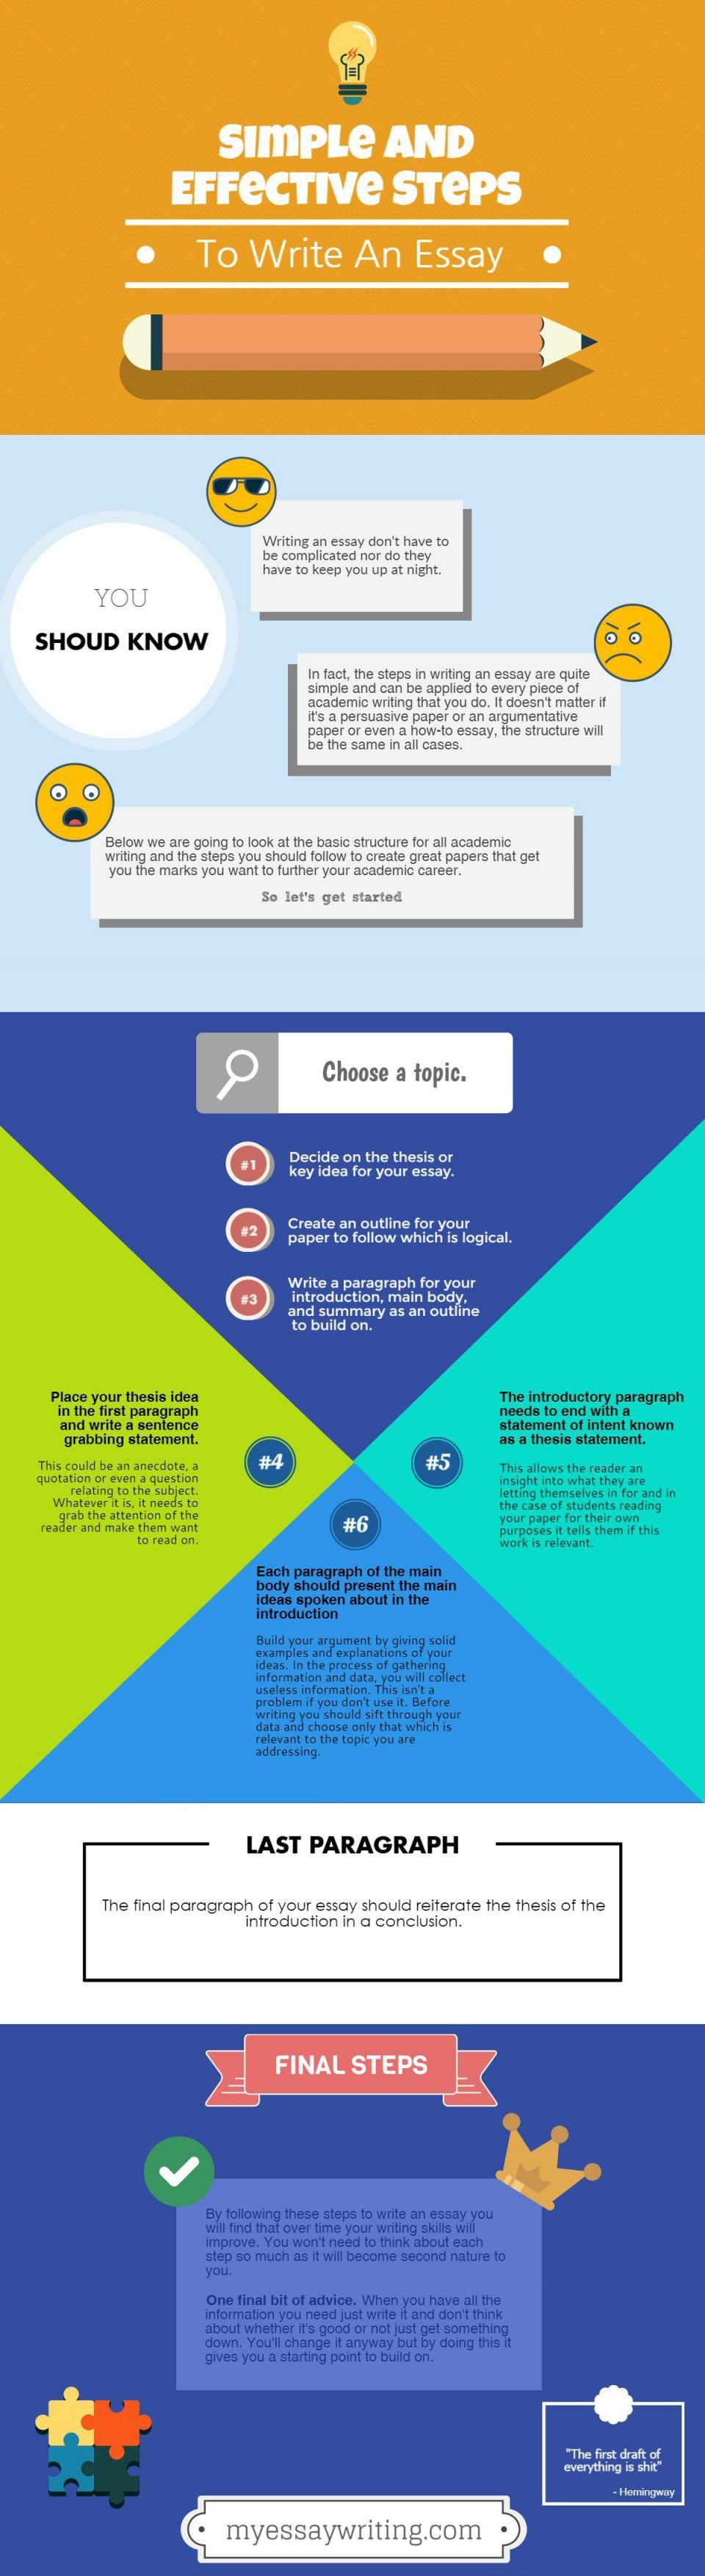 Simple and Effective Steps to Write an Essay Infographic